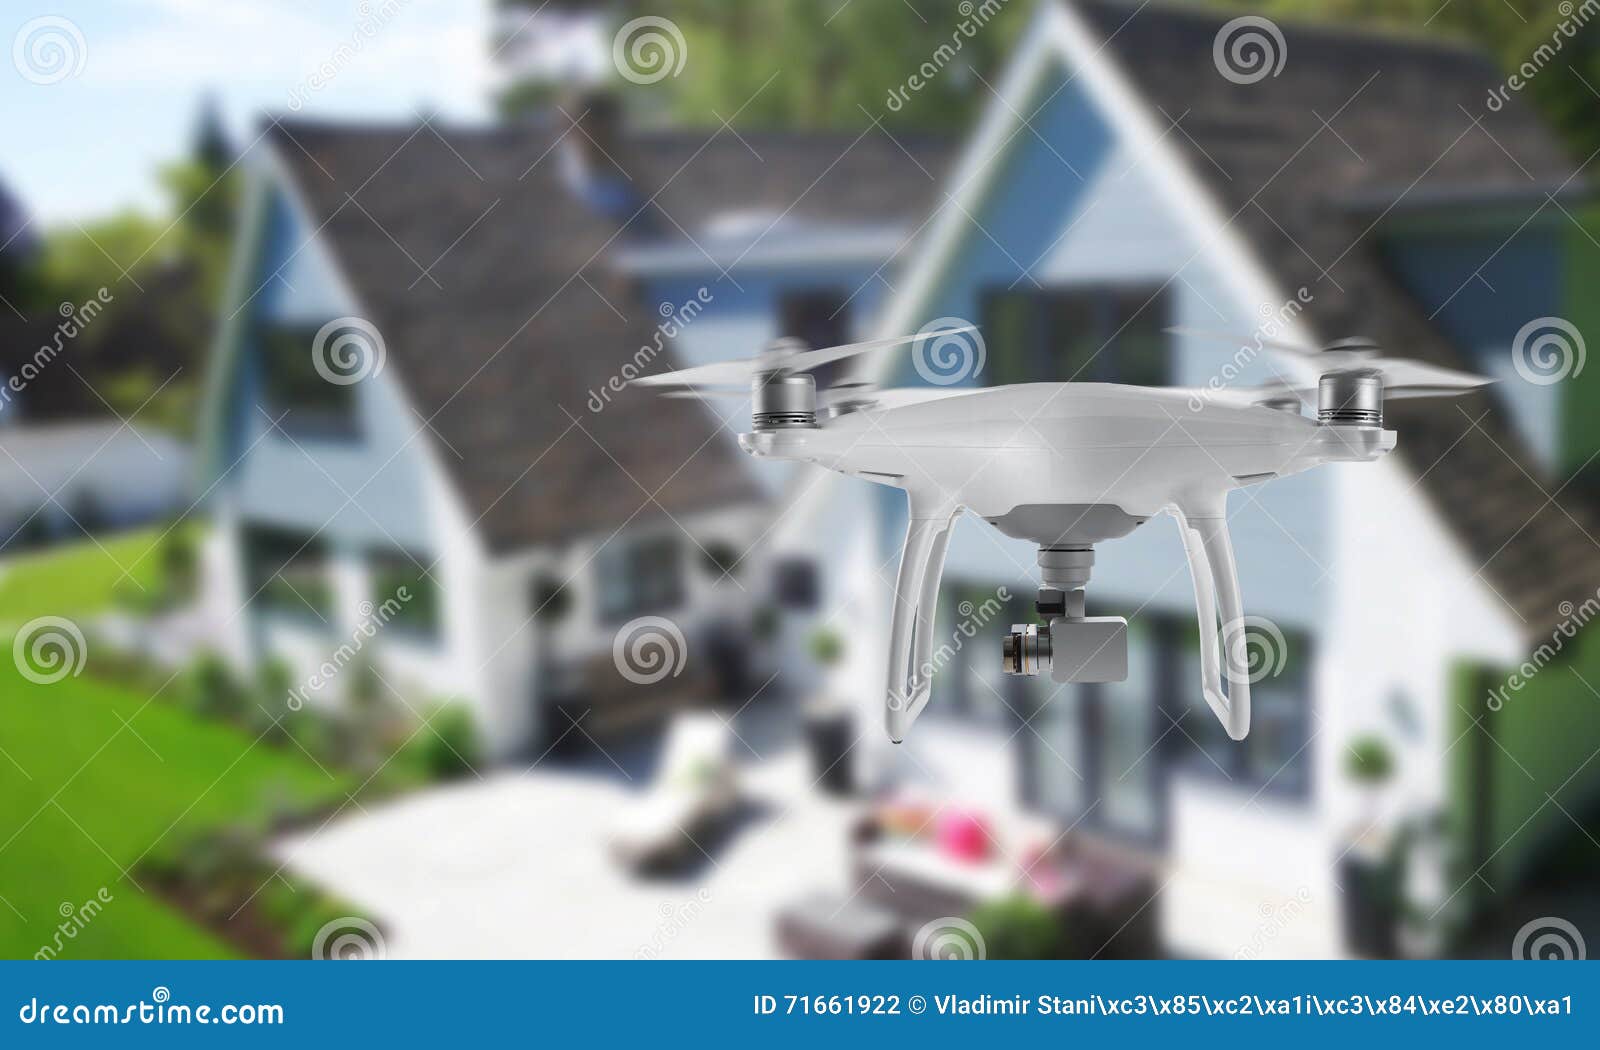 drone quad copter with camera spying on the house and yard